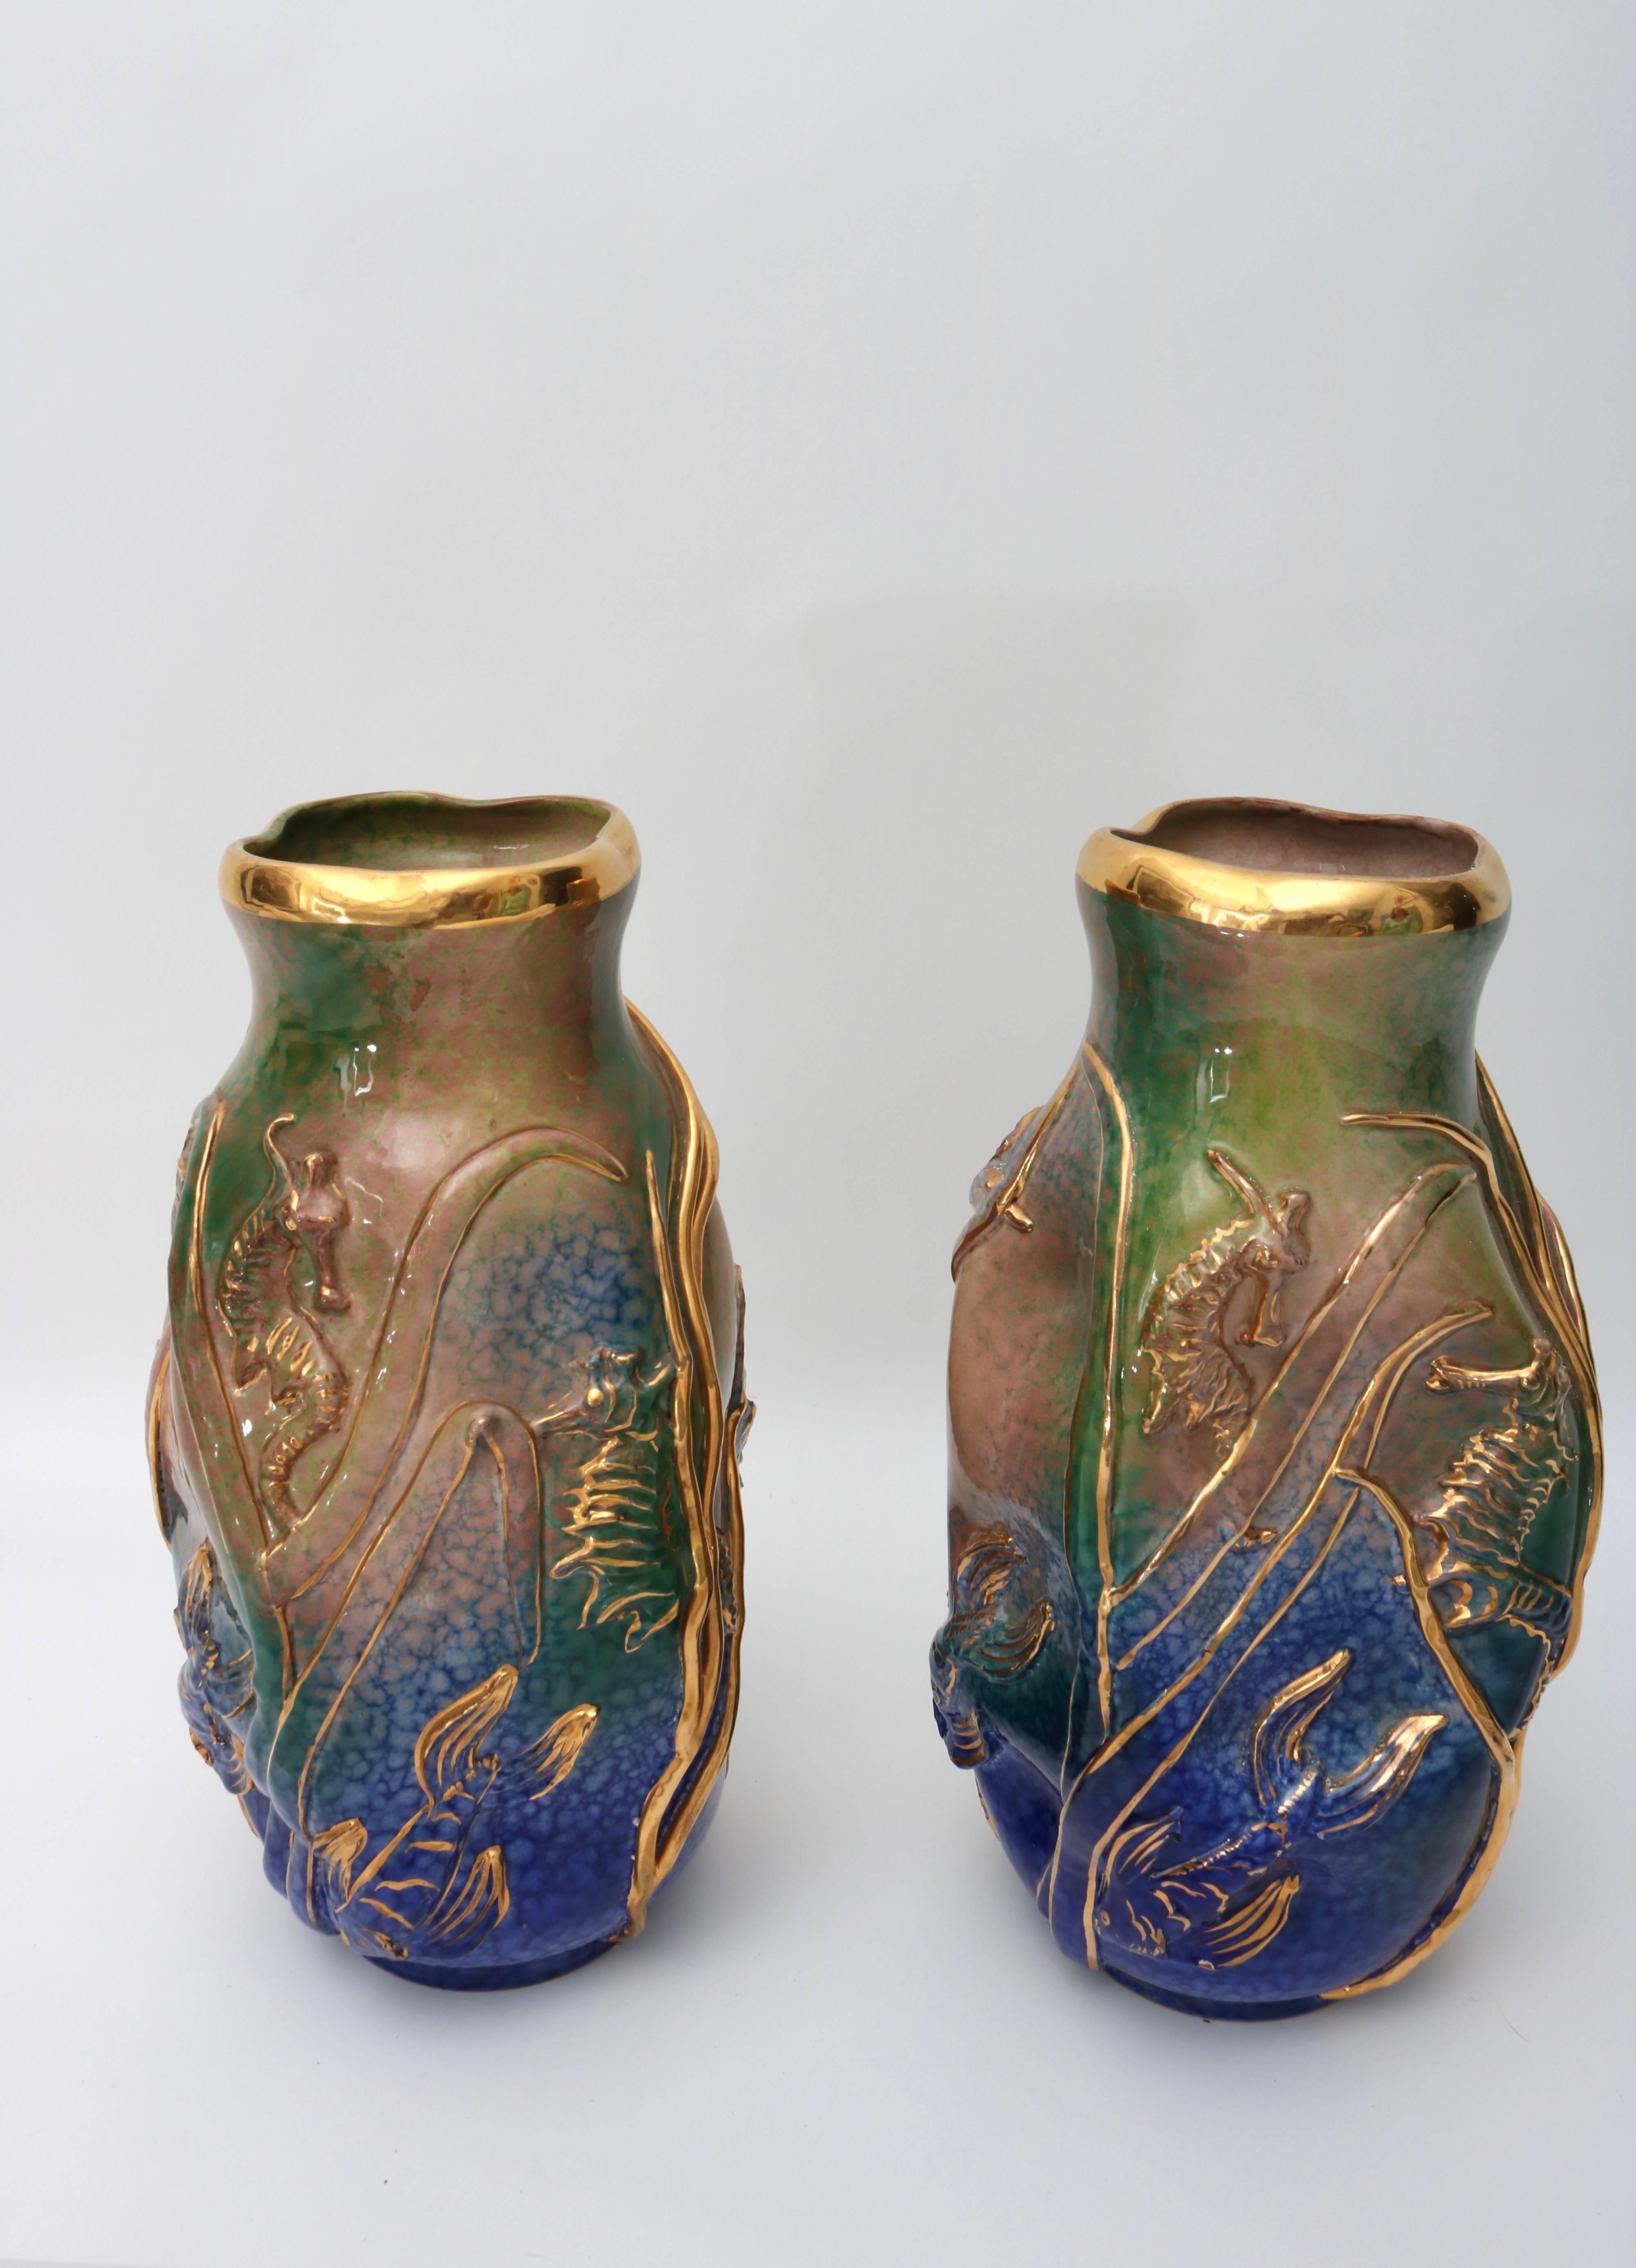 This stylish pair of vases are very much in the style of pieces created by Gio Ponti. They were made in Italy in the late 1950s to the 1960s and sold by M. Fusco in New York city. They are glazed terracotta with embellished with sea grass, seahorses